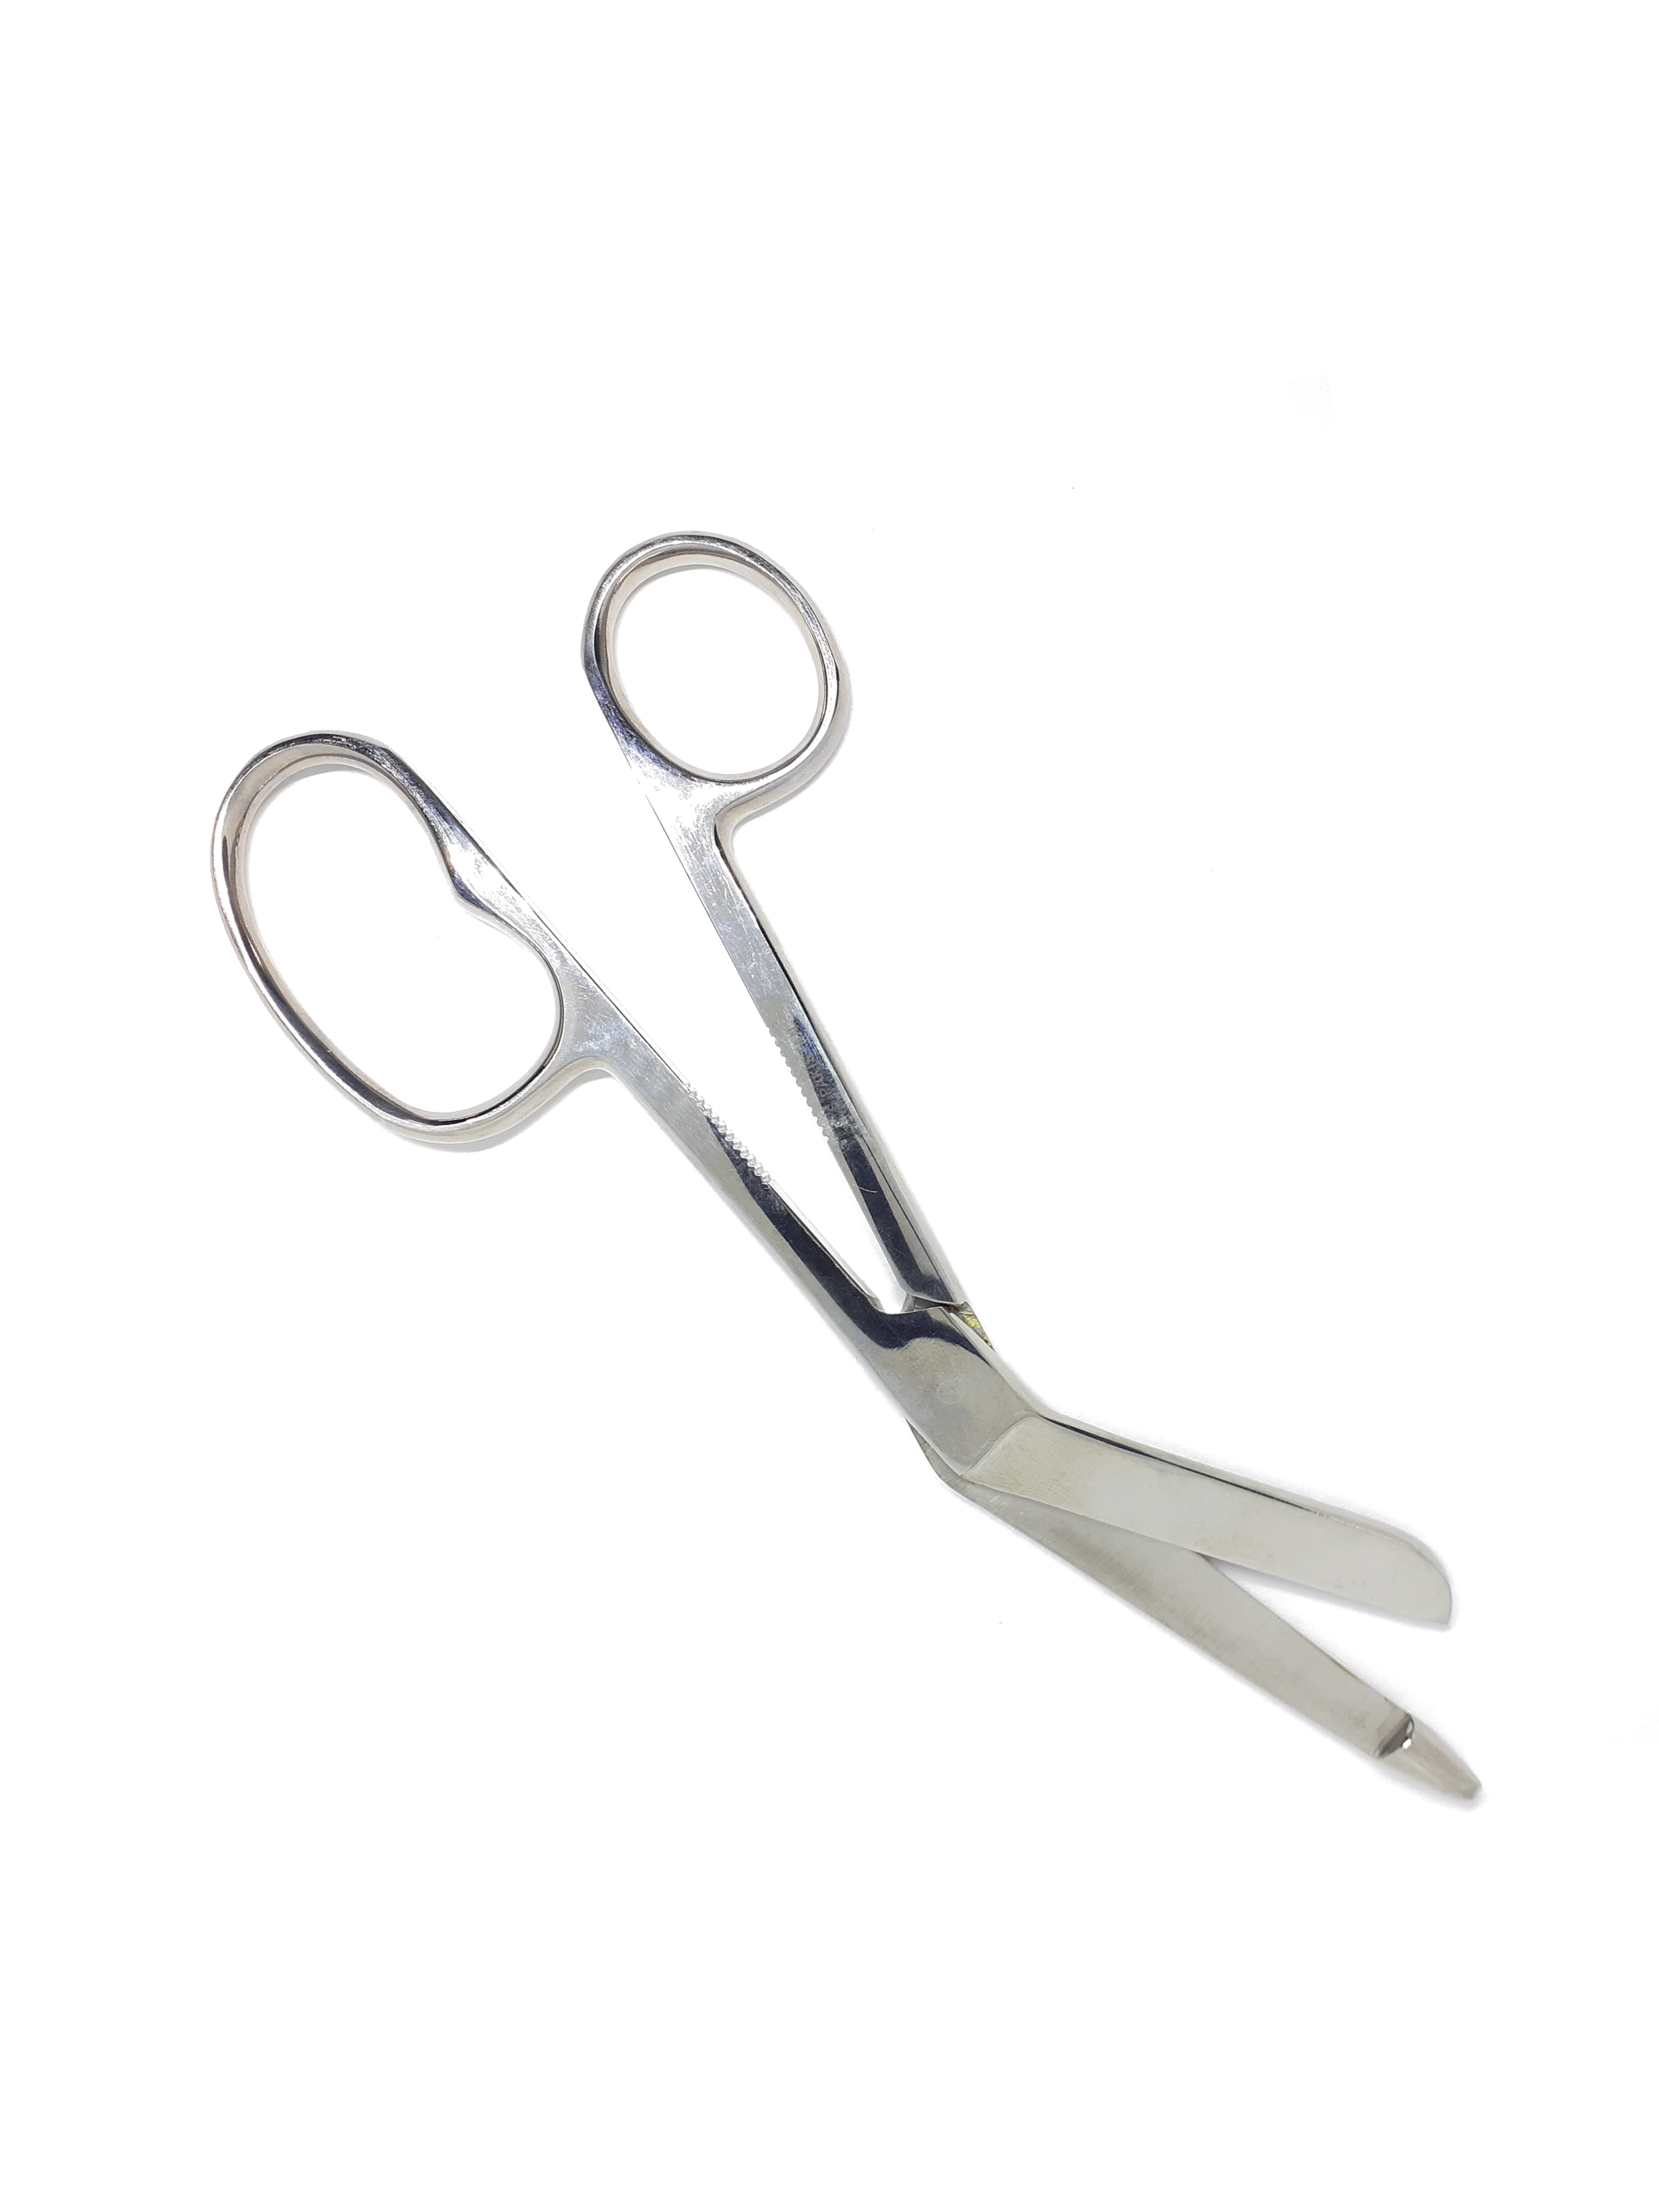 7.25 inch Stainless Steel Gripping Scissor - Gripsors